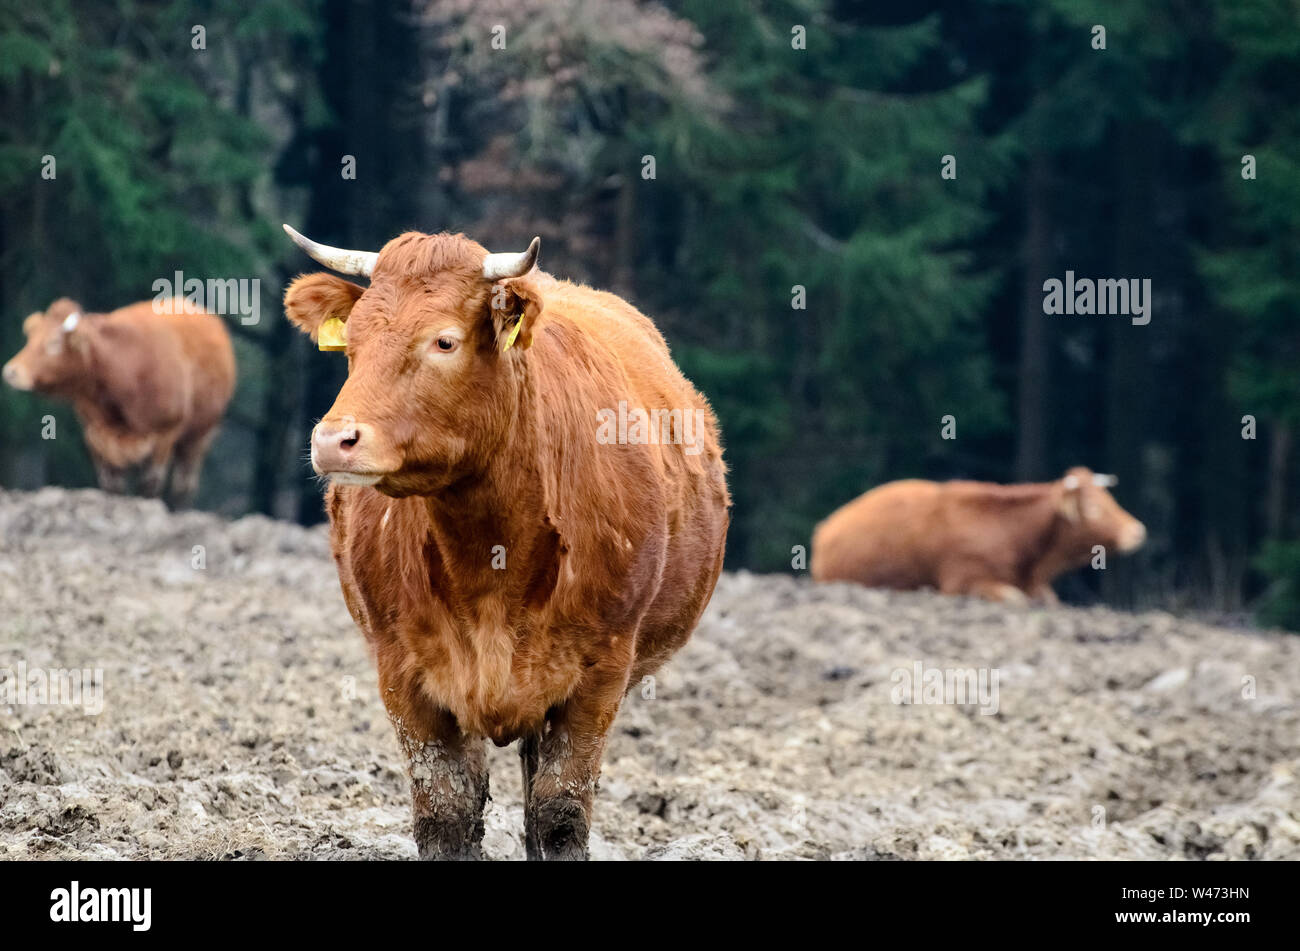 Bos taurus, Cattle on a pasture in the countryside in Bavaria, Germany Stock Photo